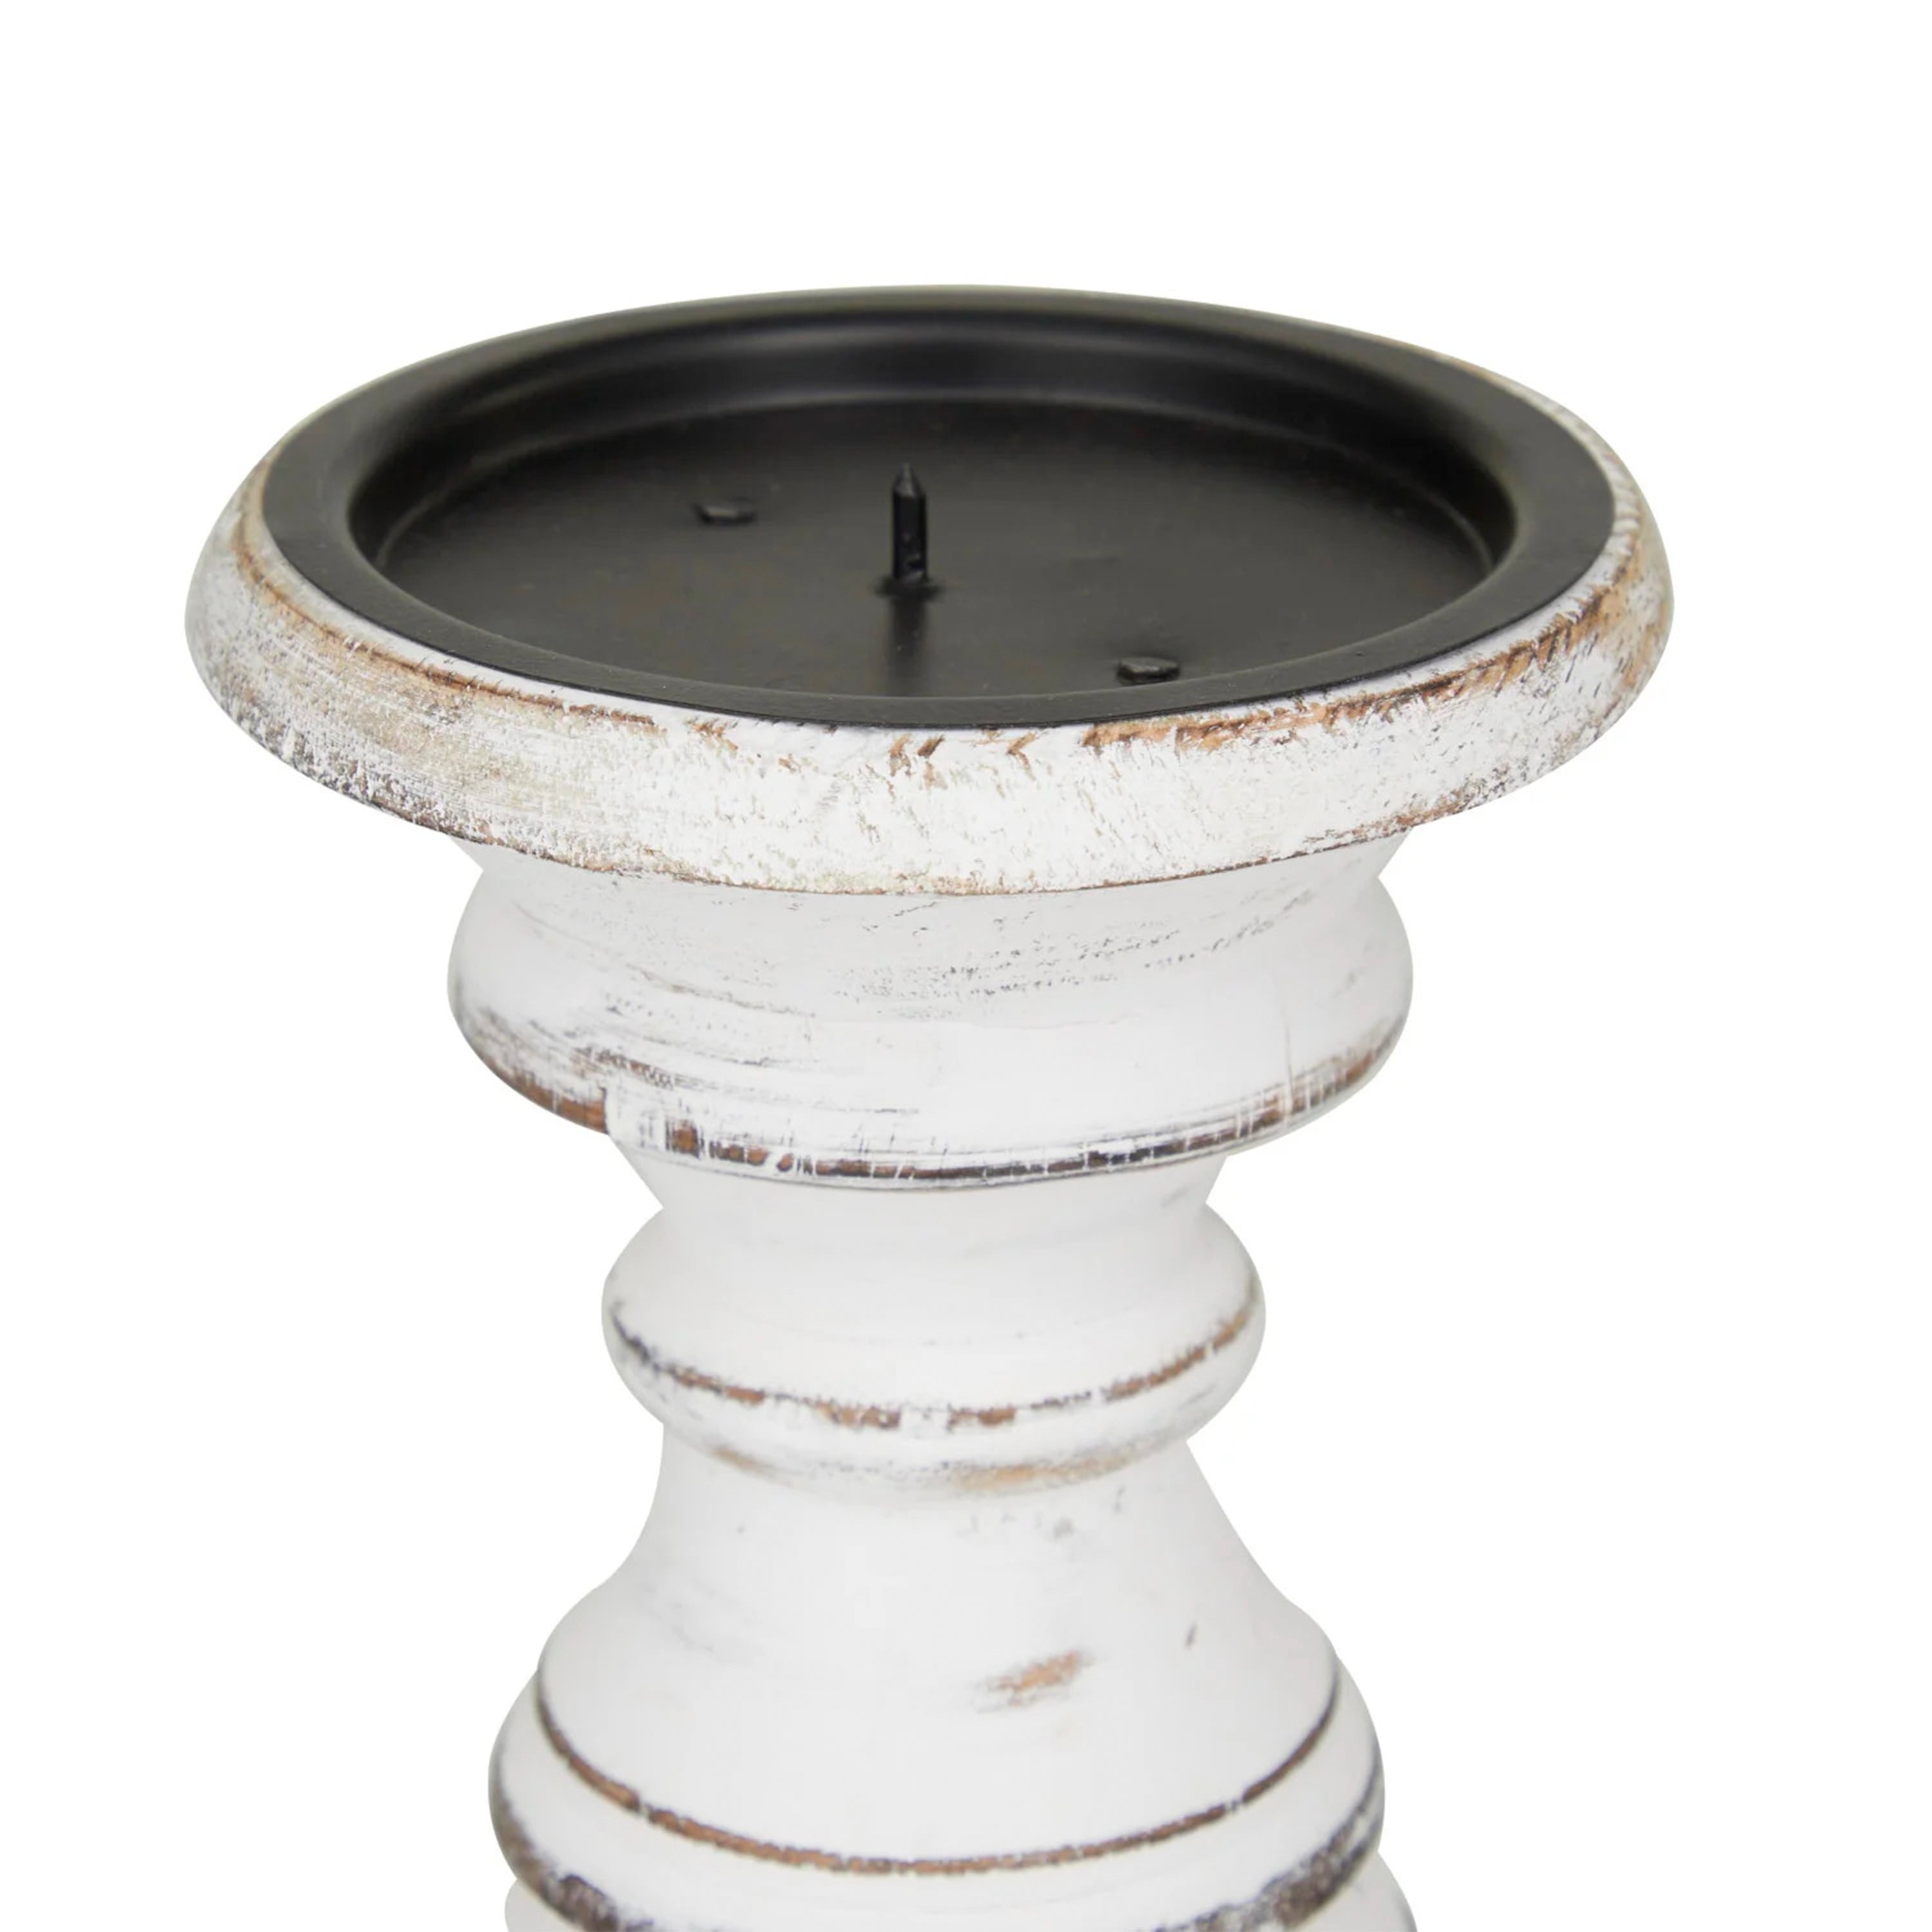 Turned Design Wooden Candle Holder with Distressed Details (Set of 3) - White